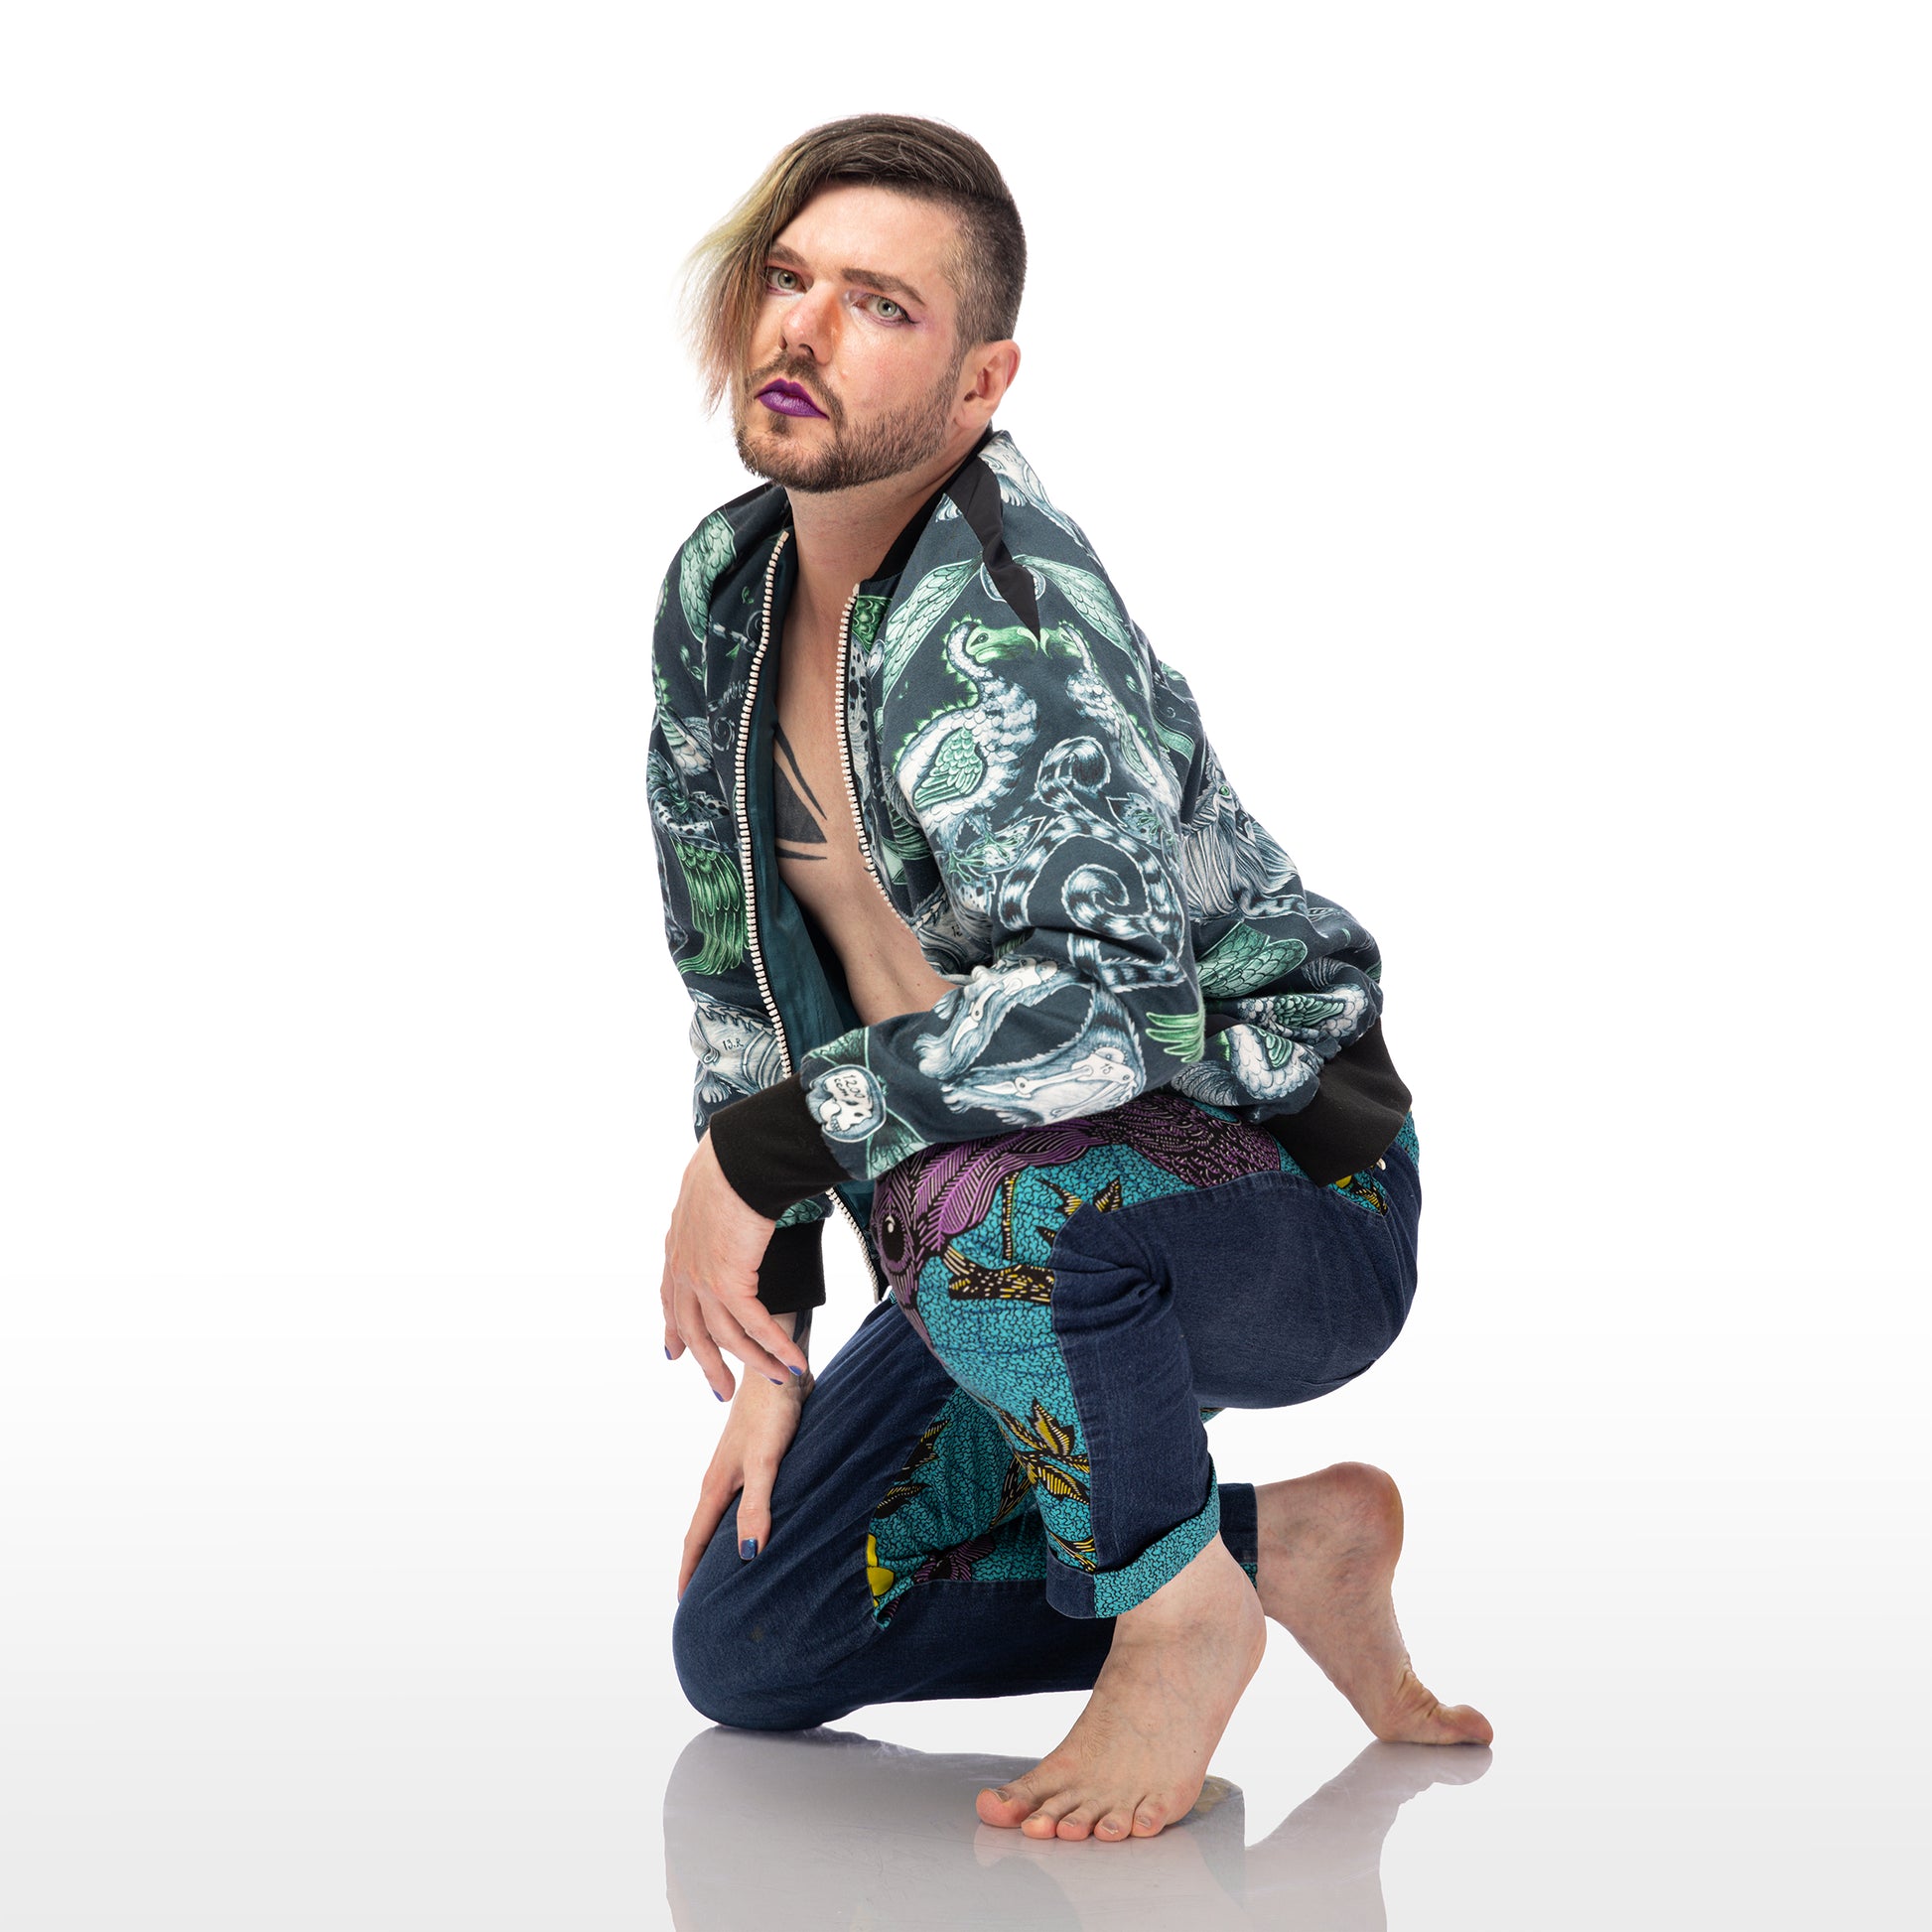 Extinct Bomber Jacket, a handmade-to-order piece made from cotton satin fabric printed with a blue and green sketched design of lions, dodos and monkeys with skeletons showing. This zip up bomber jacket has raglan sleeves, front welt pockets and ribbed collar, cuffs and waistband. Model Max kneels on the floor with one knee and leans on the other. 